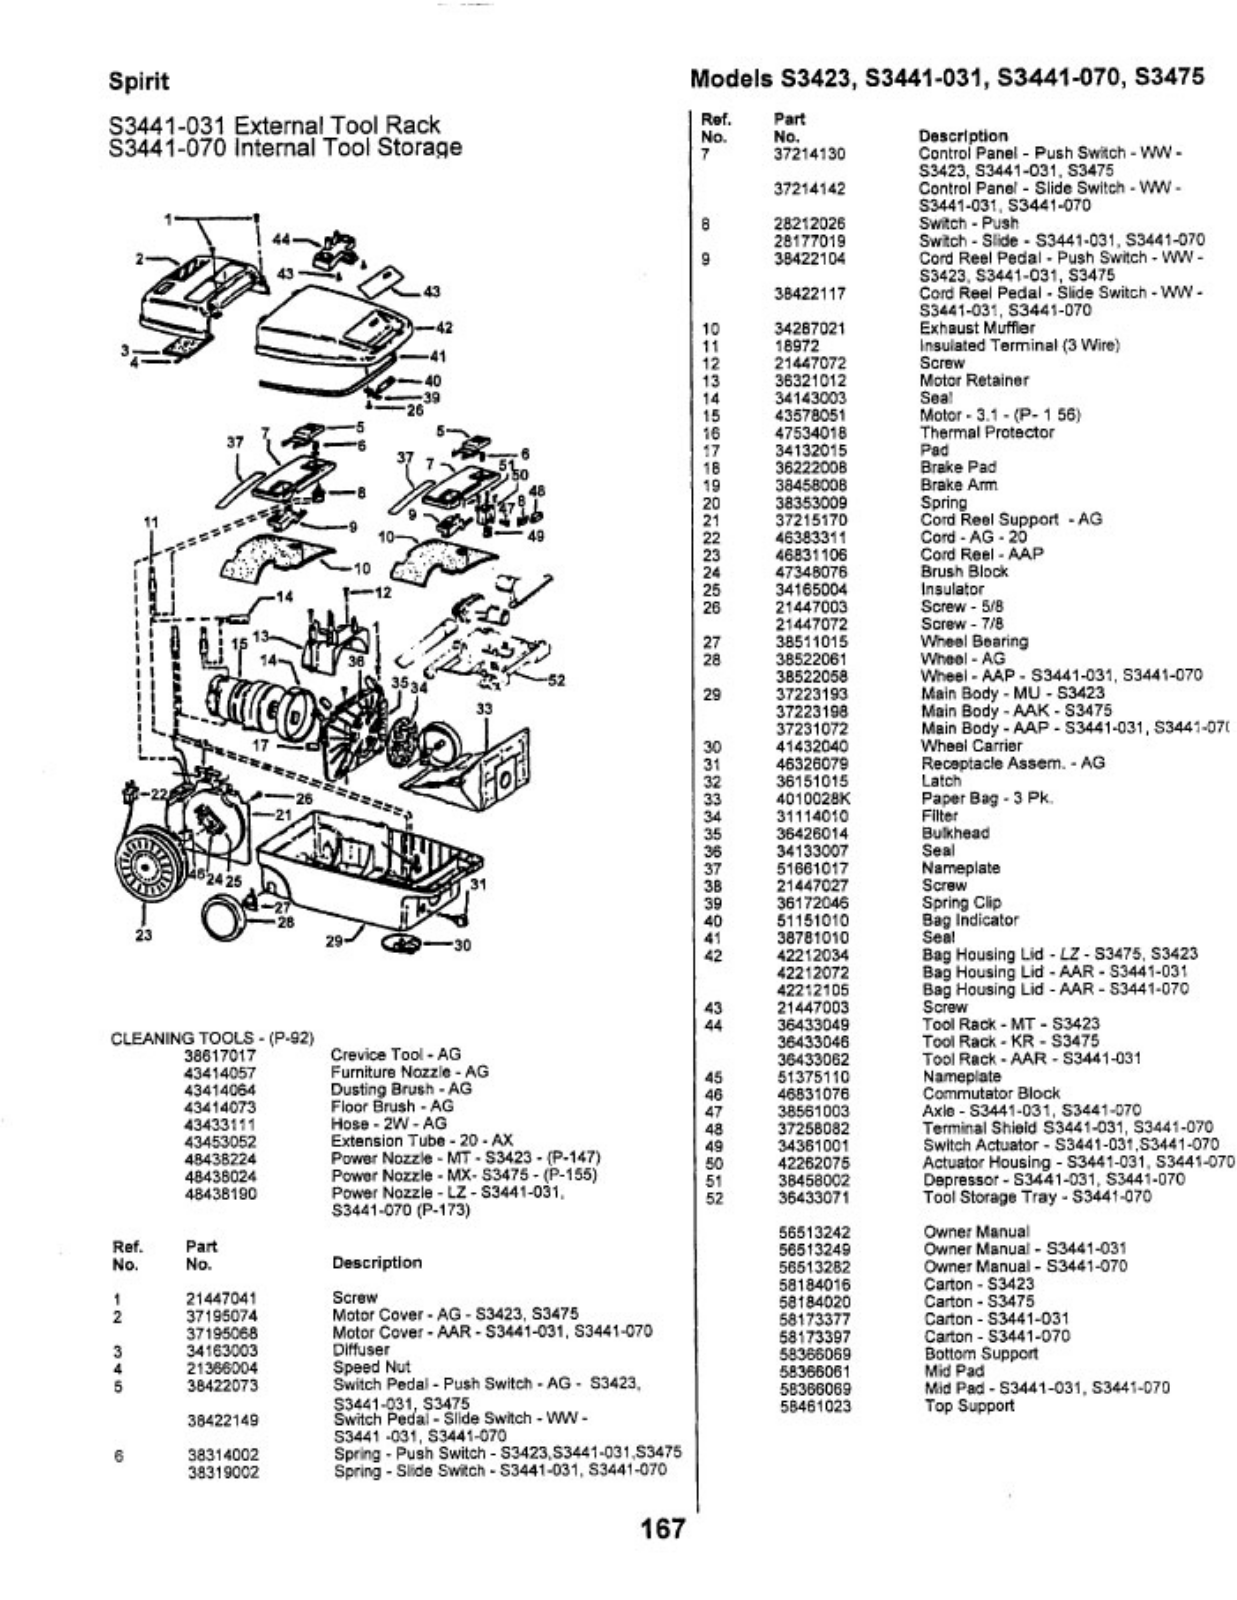 Hoover S3441-070, S3475, S3441-031, S3423 Owner's Manual